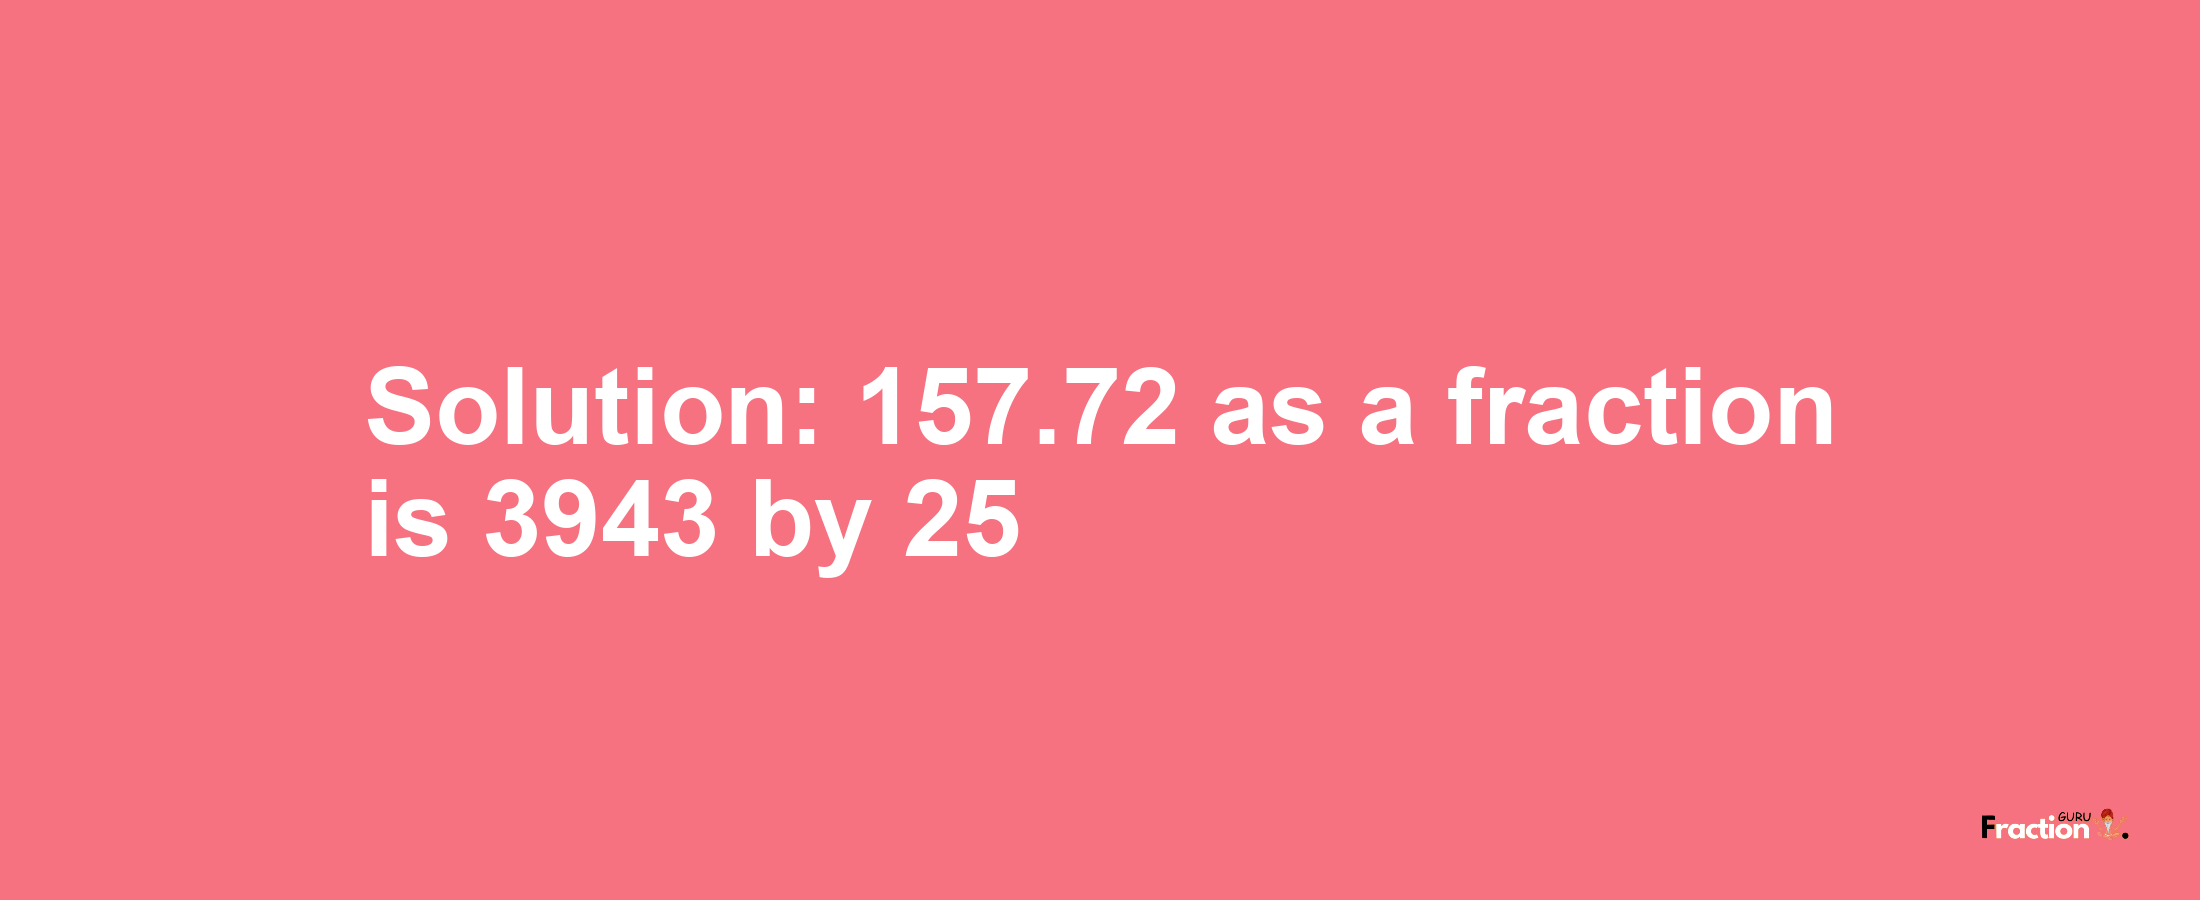 Solution:157.72 as a fraction is 3943/25